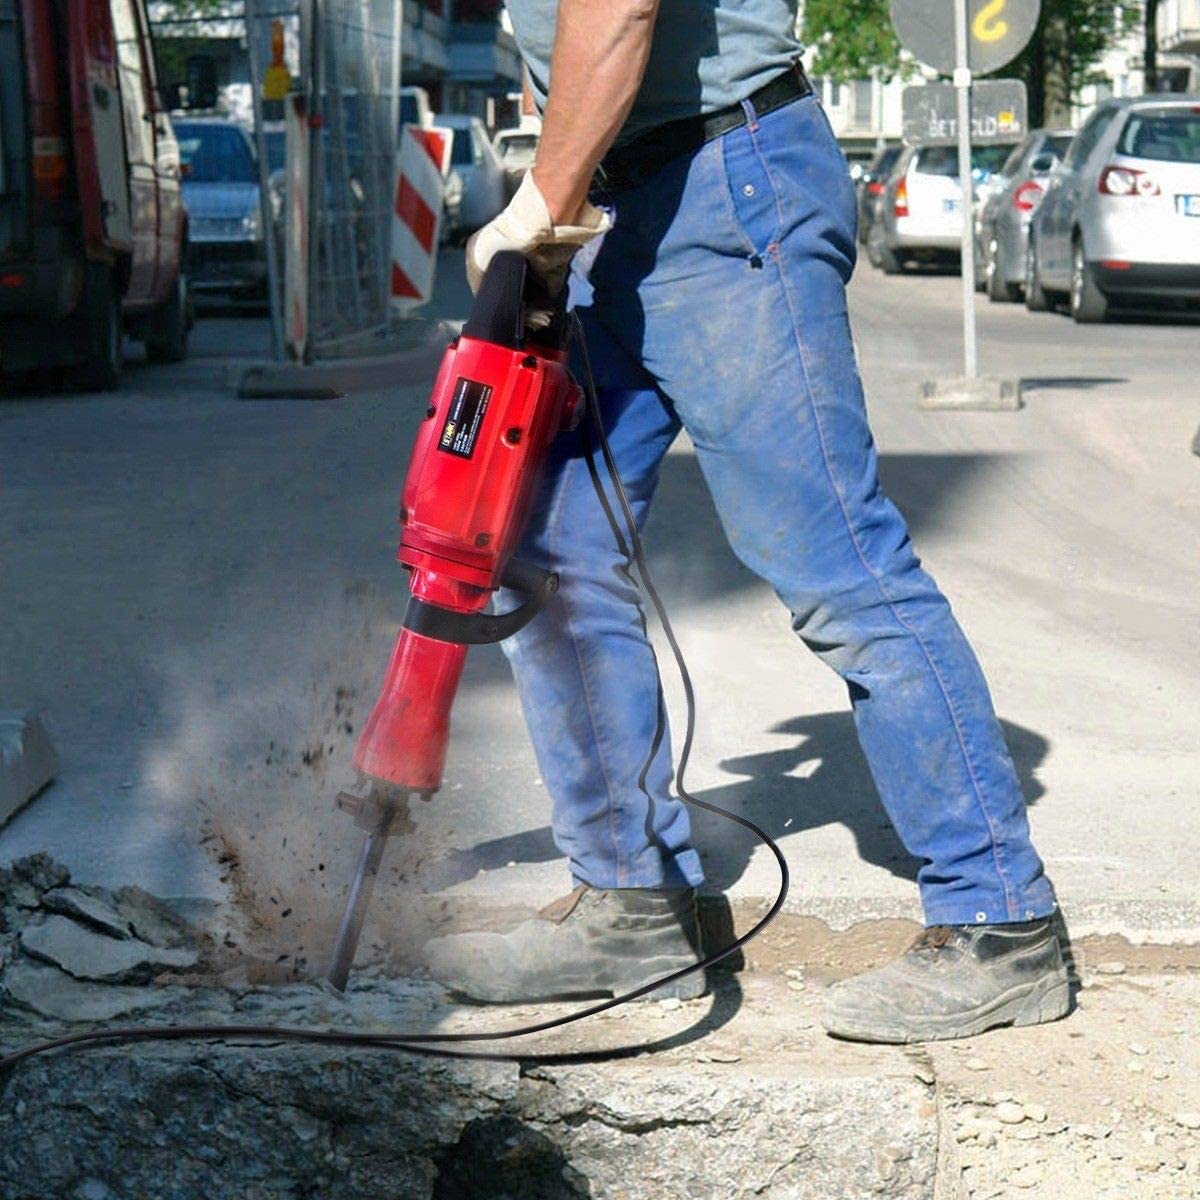 XtremepowerUS 2200 Watt Electric Demolition Jackhammer 1 - What Is a Jackhammer and How Does It Work? - HandyMan.Guide -